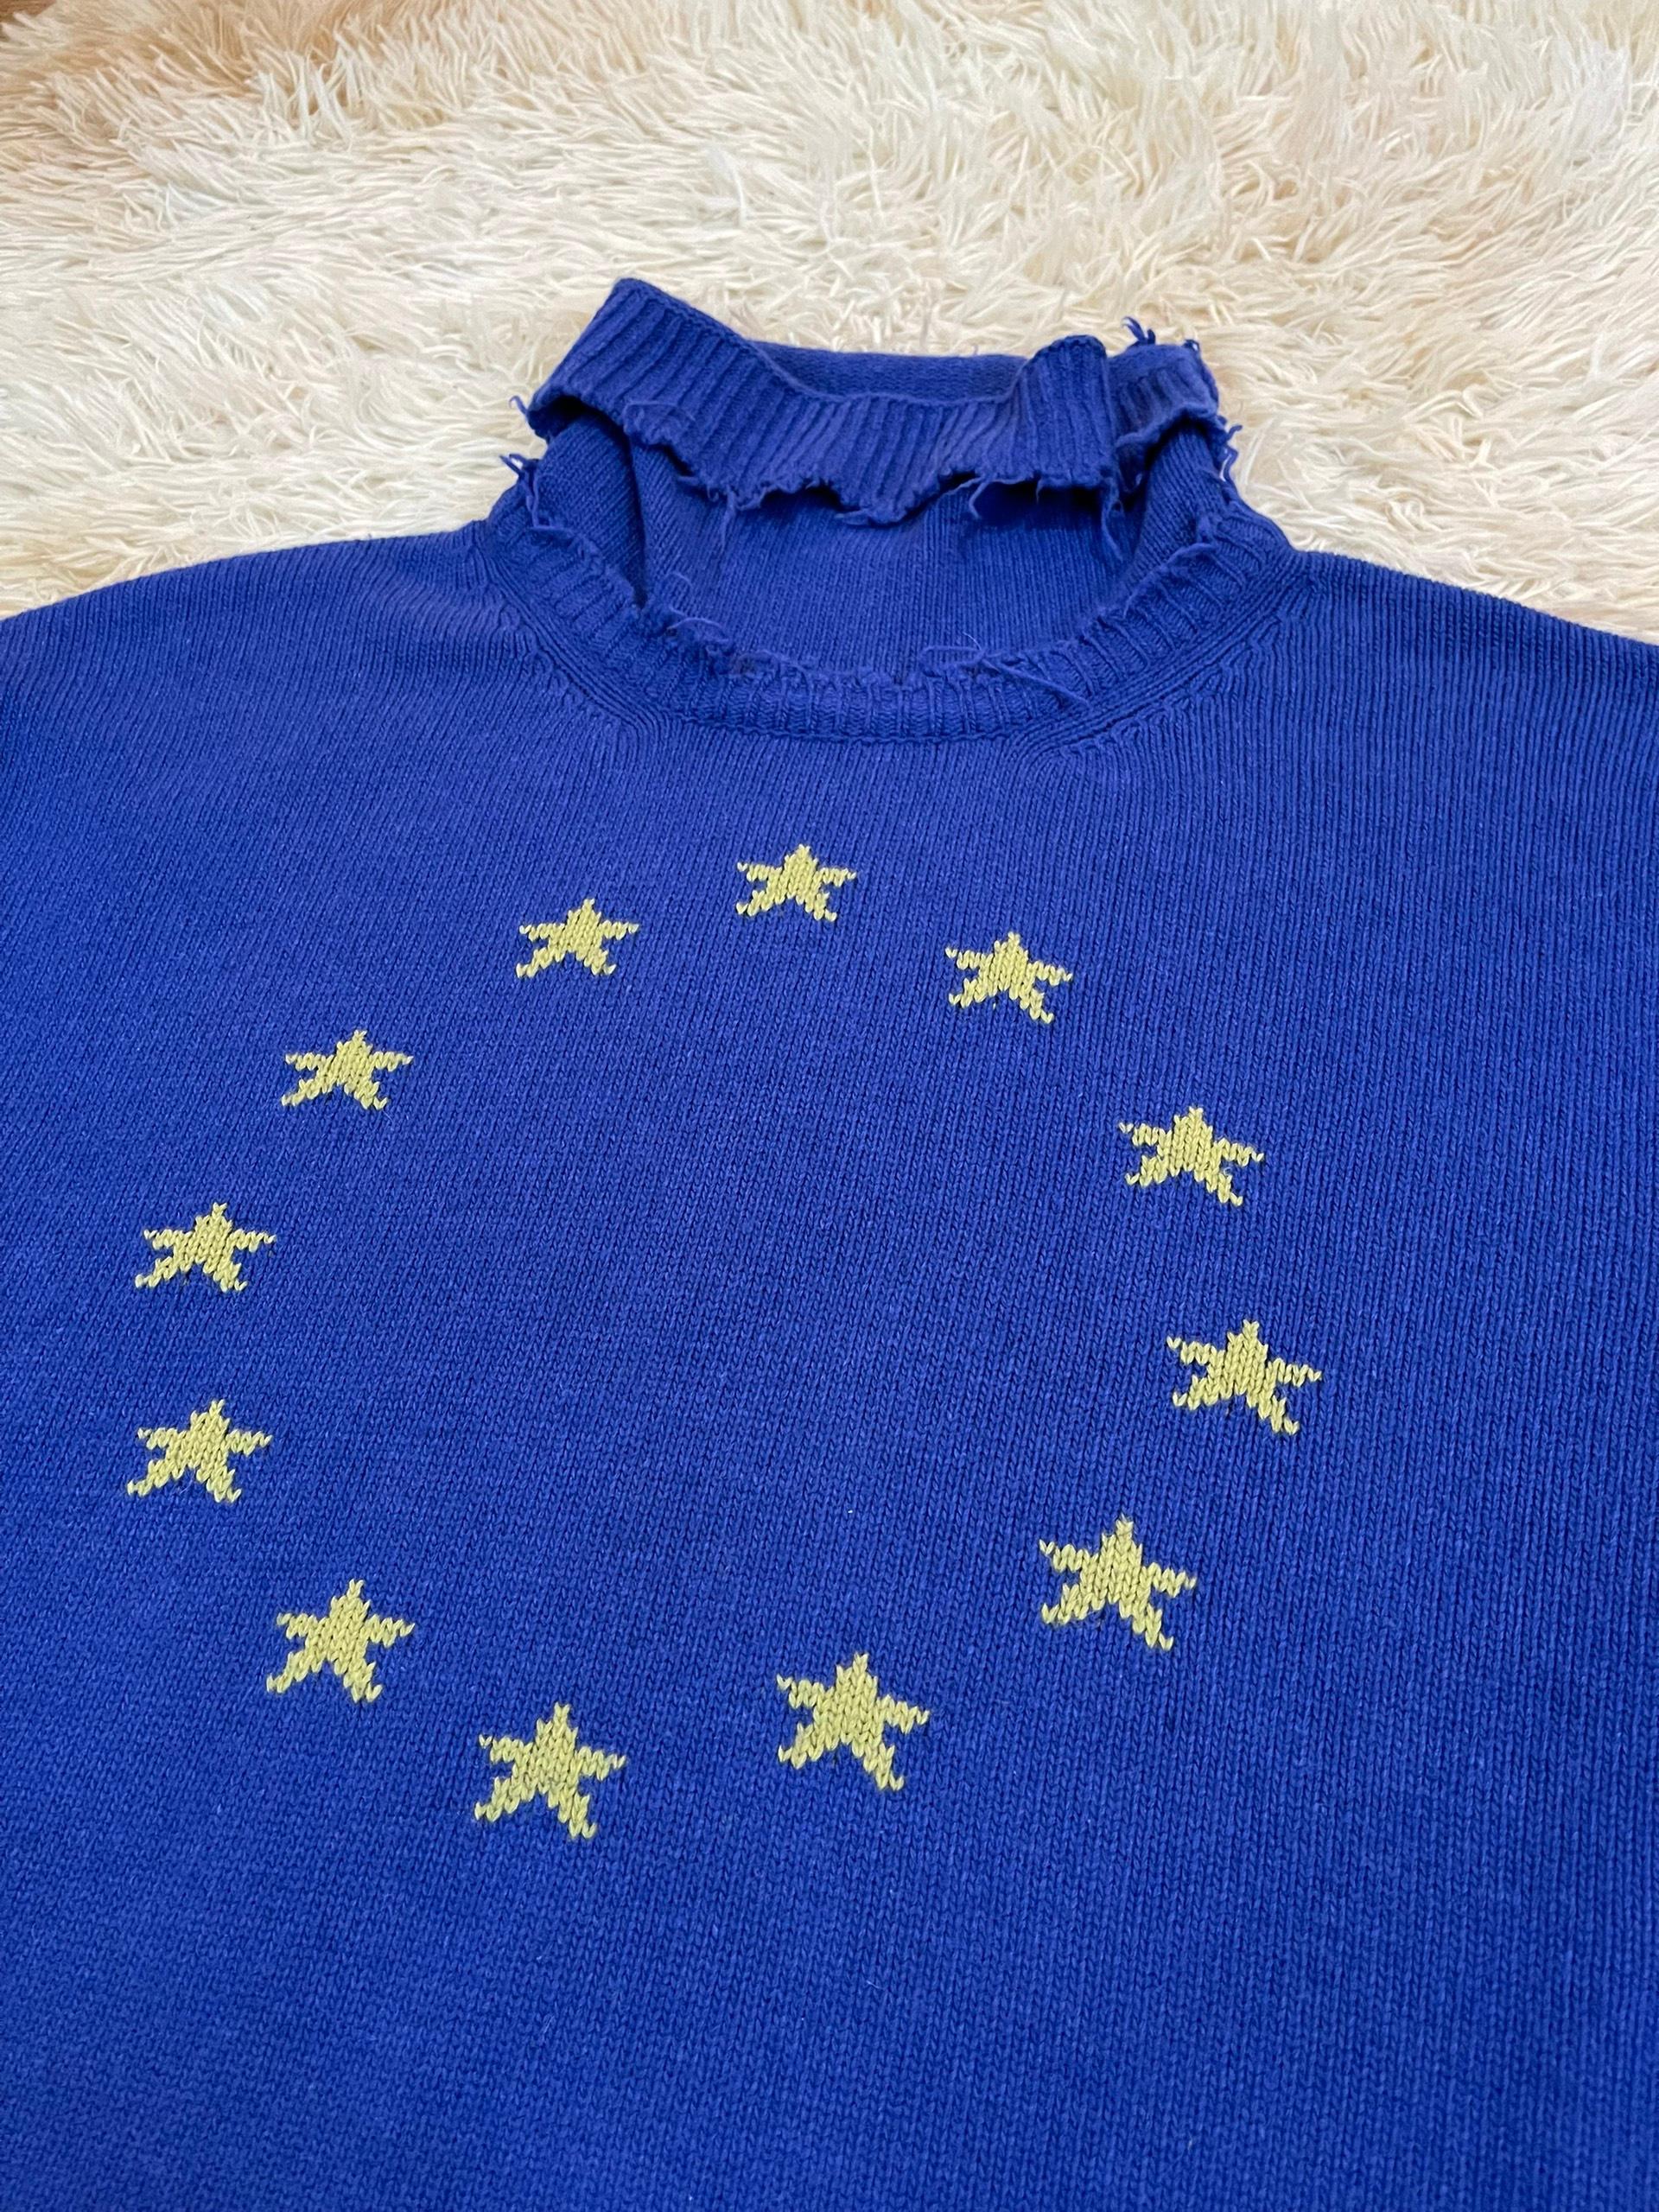 Blue wool oversize turtleneck sweater from Vetements. Embroidered yellow pattern of stars at front. Raw trimming.


The item was some of Demna's early grail.


I also have the Europe Hoodie available, please check my profile.


Size: S, fits up to